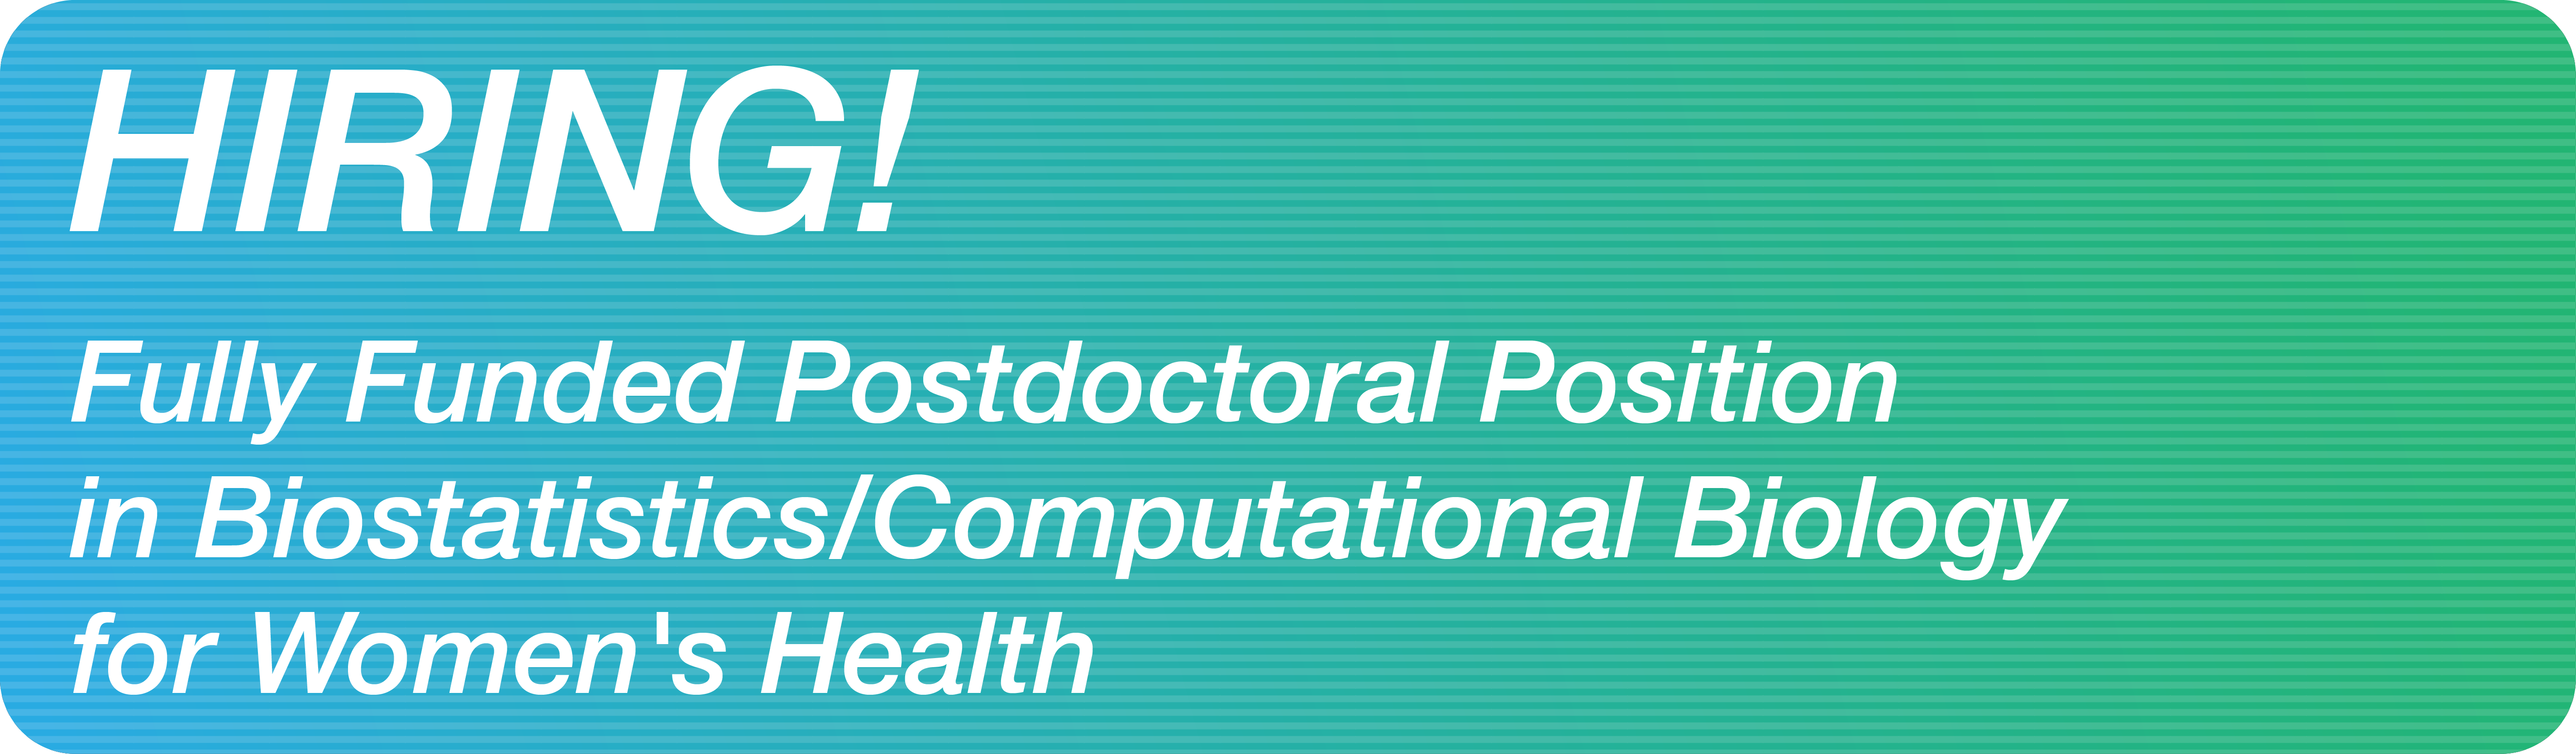 Hiring - Fully Funded Postdoctoral Position in Biostatistics/Computational Biology for Women's Health